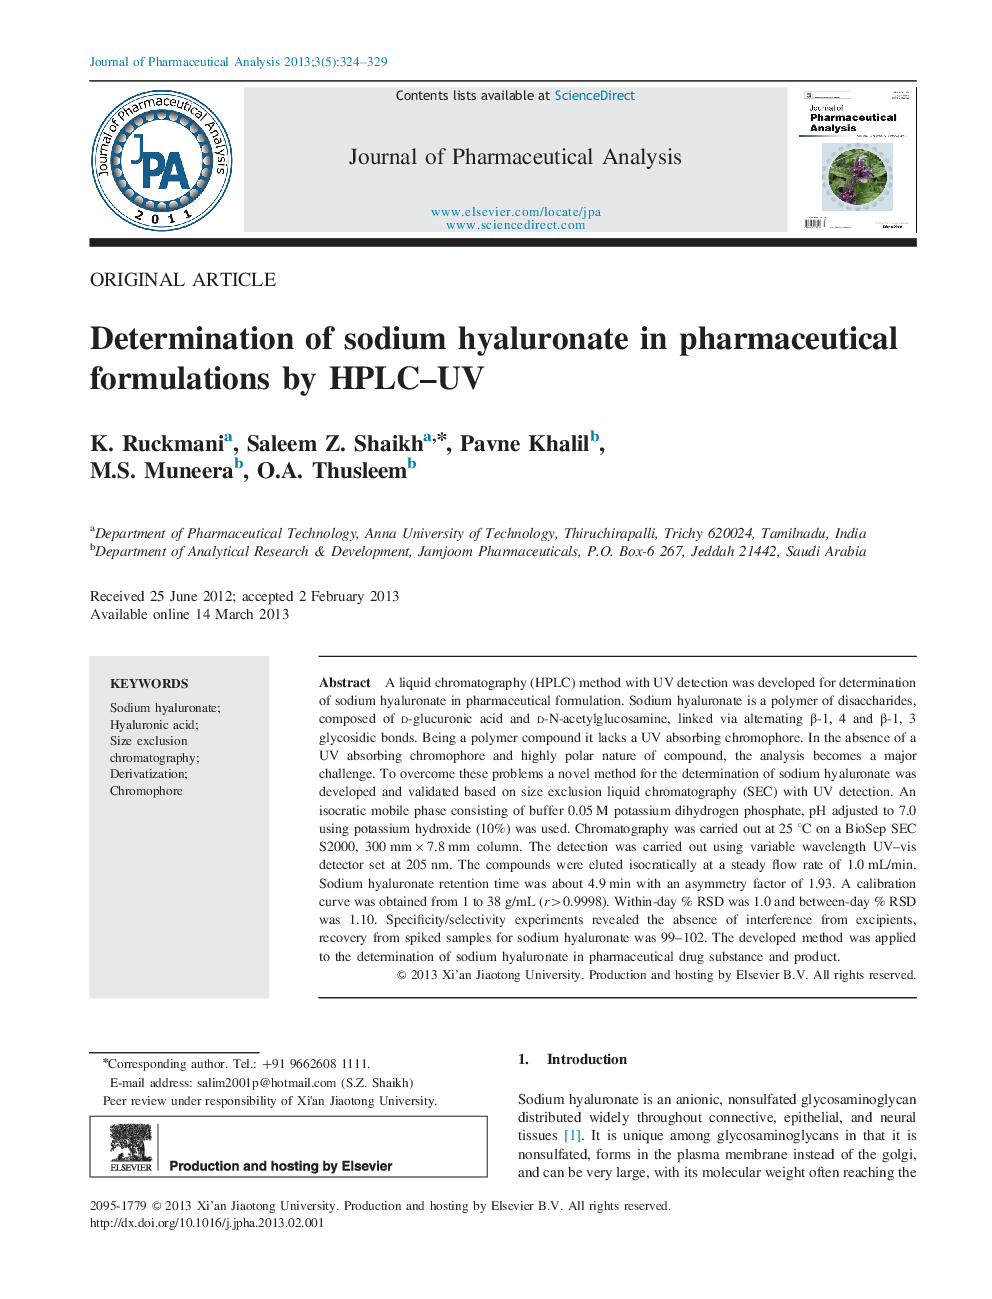 Determination of sodium hyaluronate in pharmaceutical formulations by HPLC–UV 